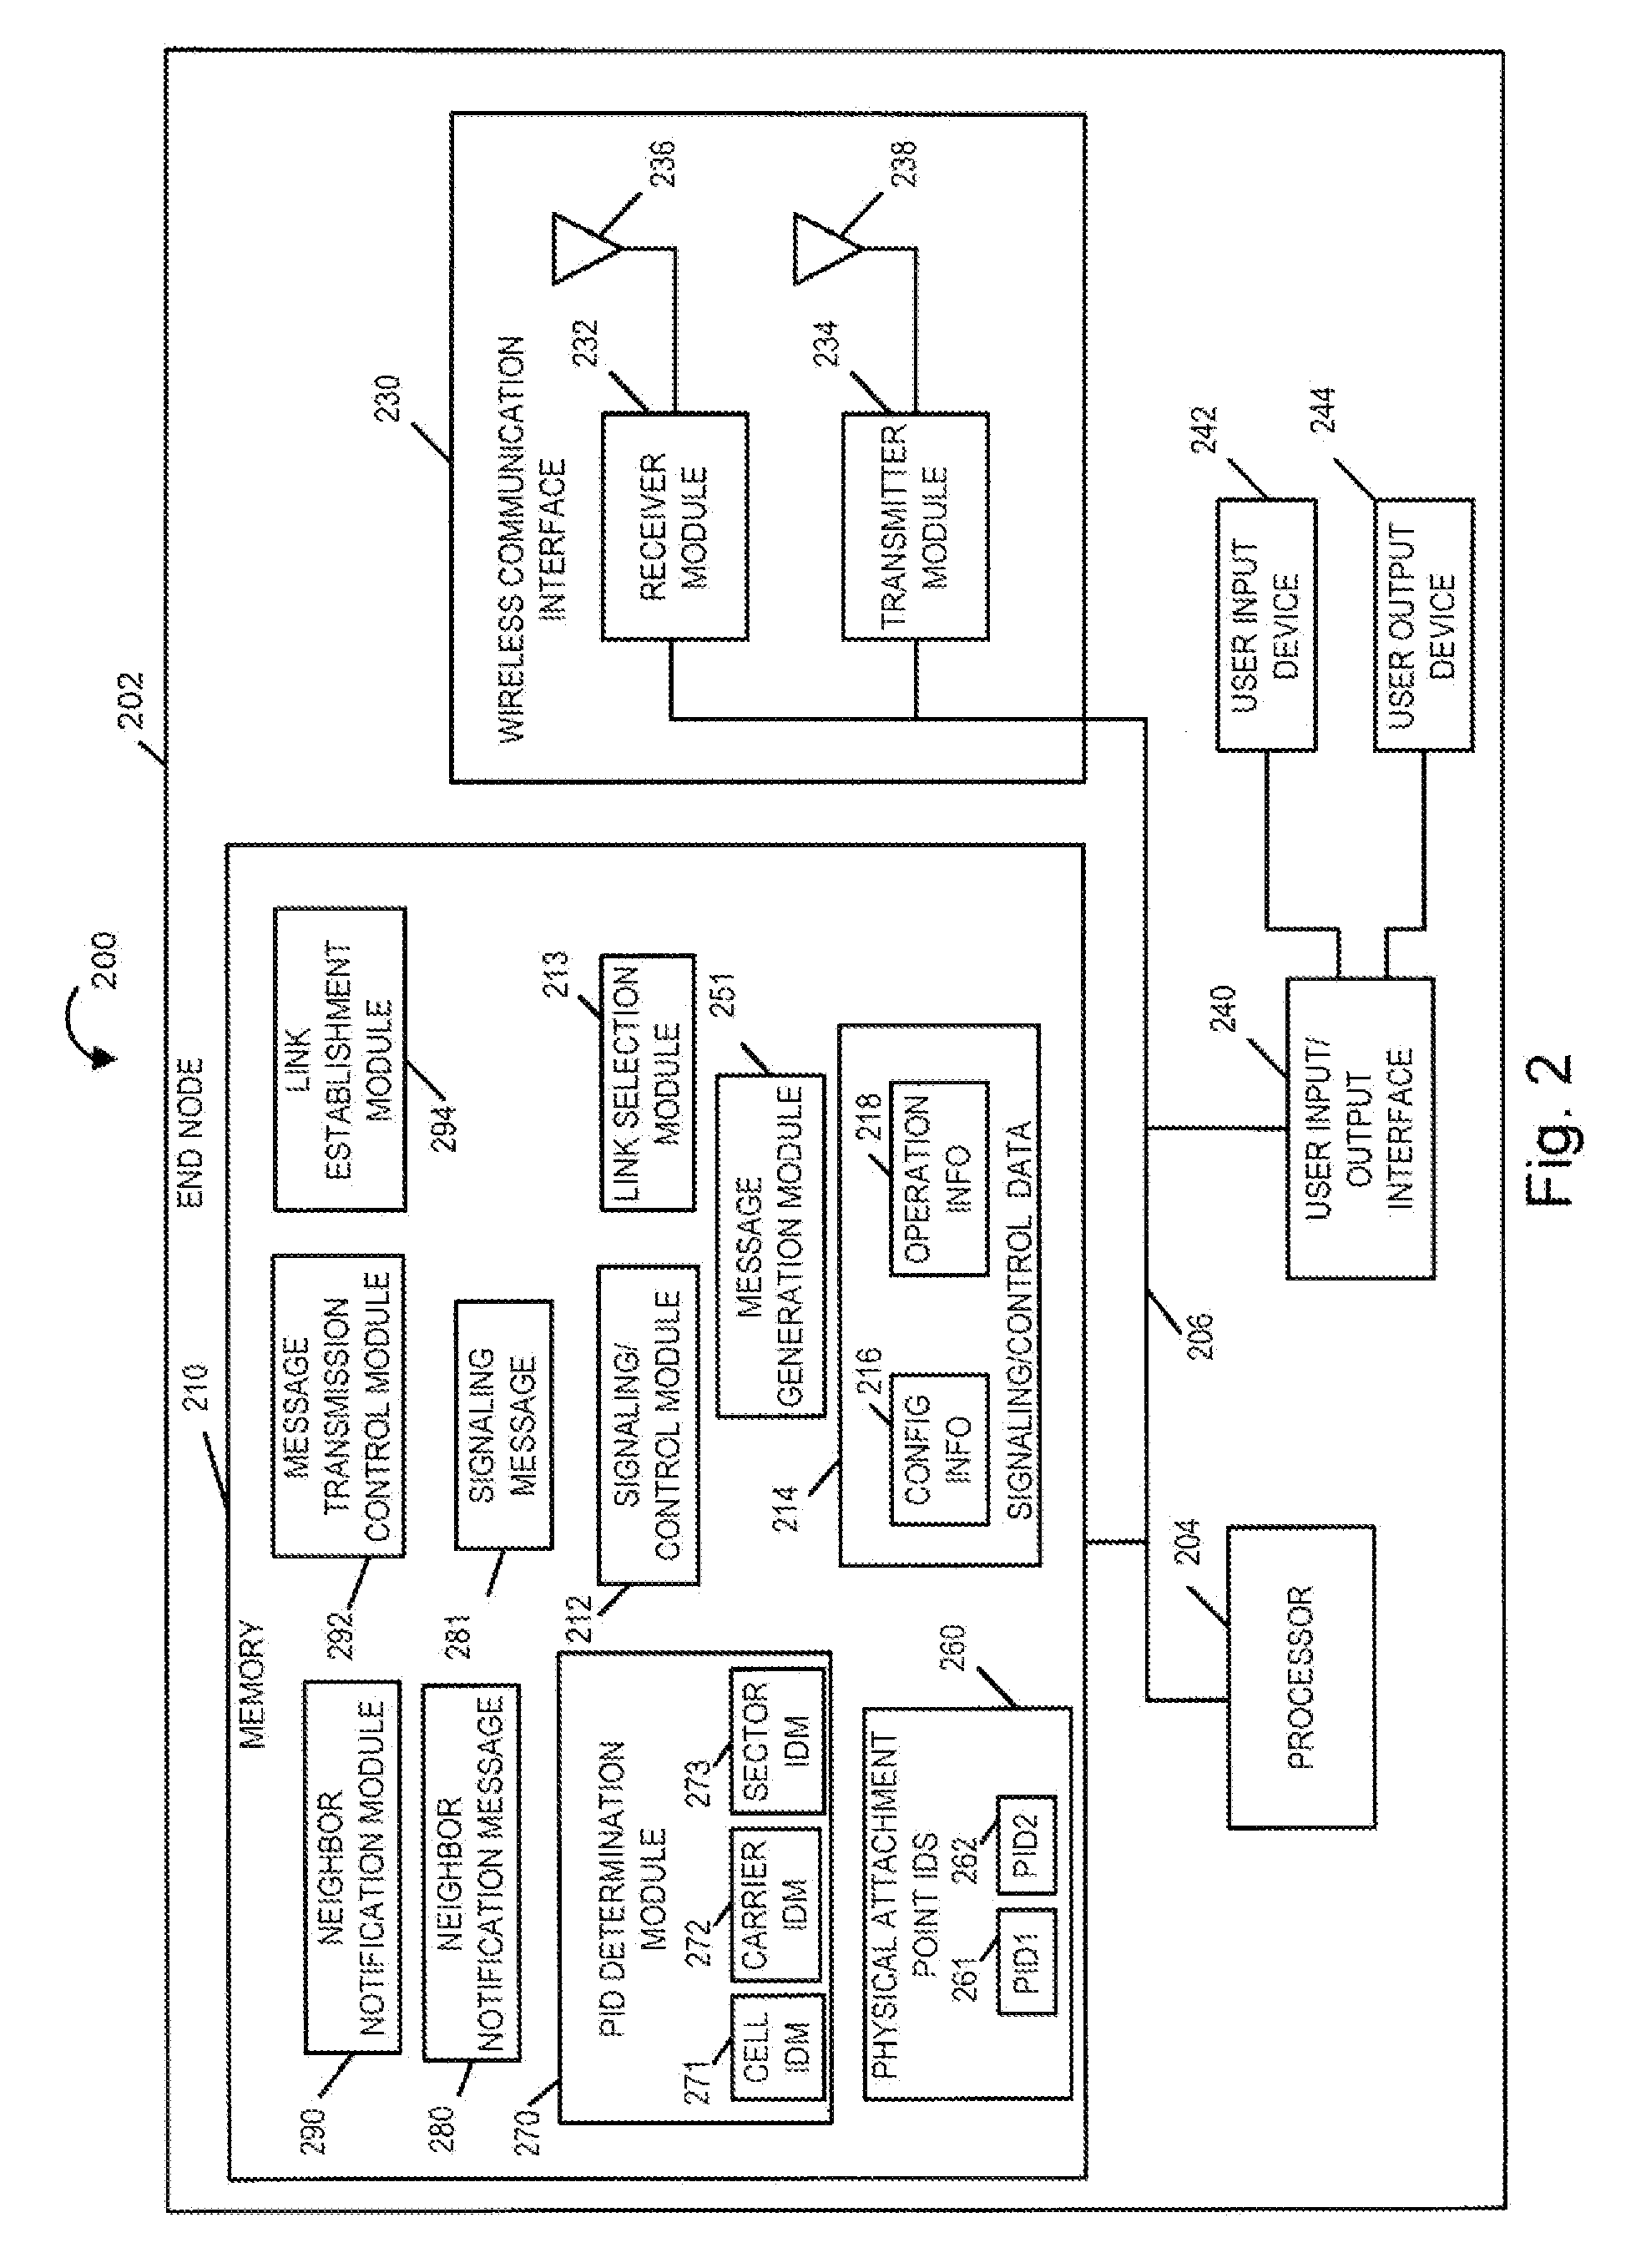 Method and apparatus for end node assisted neighbor discovery